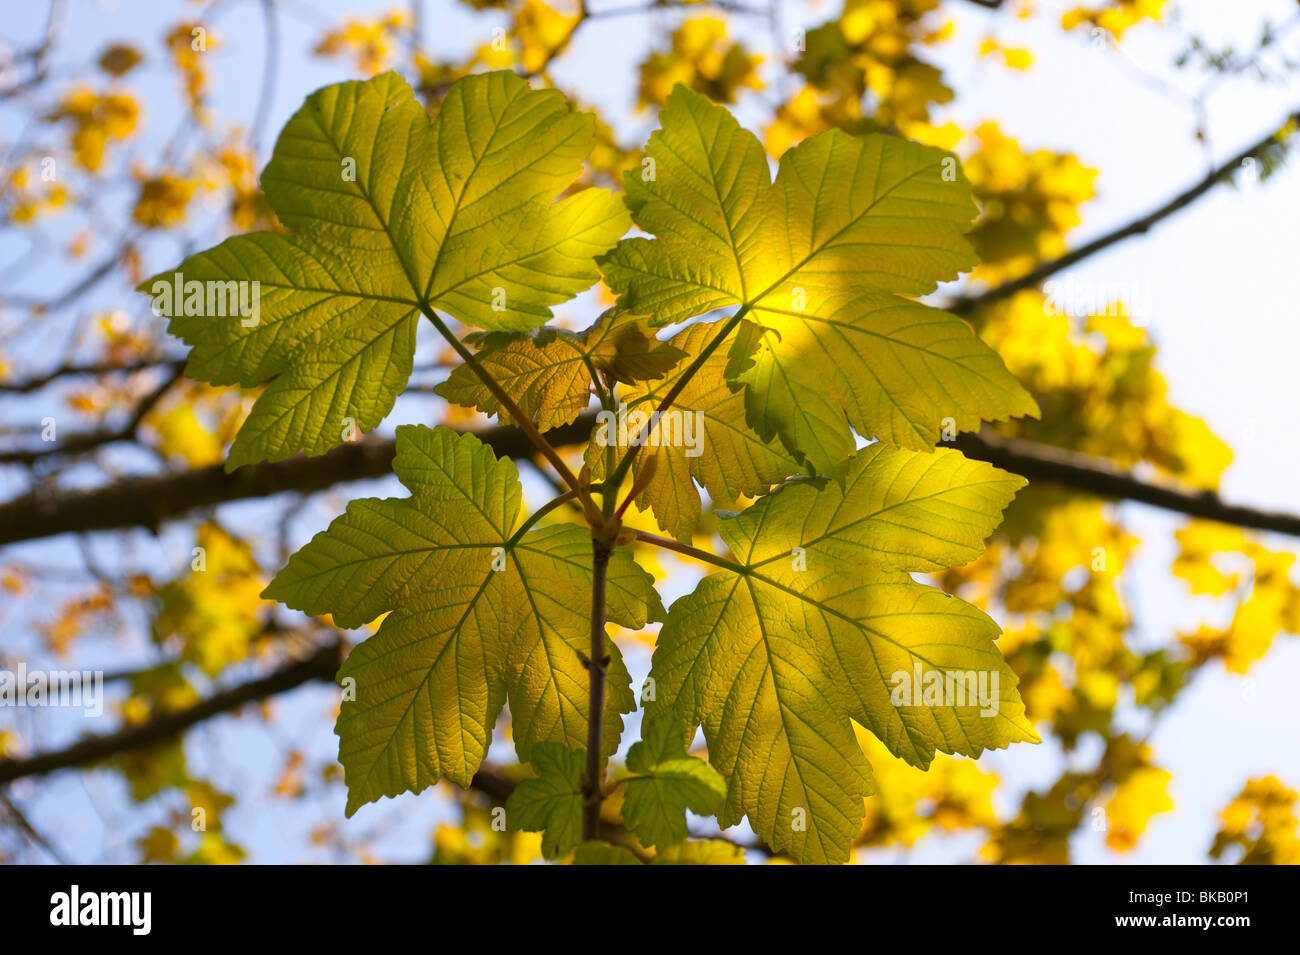 New leaves opening on a sycamore tree Stock Photo